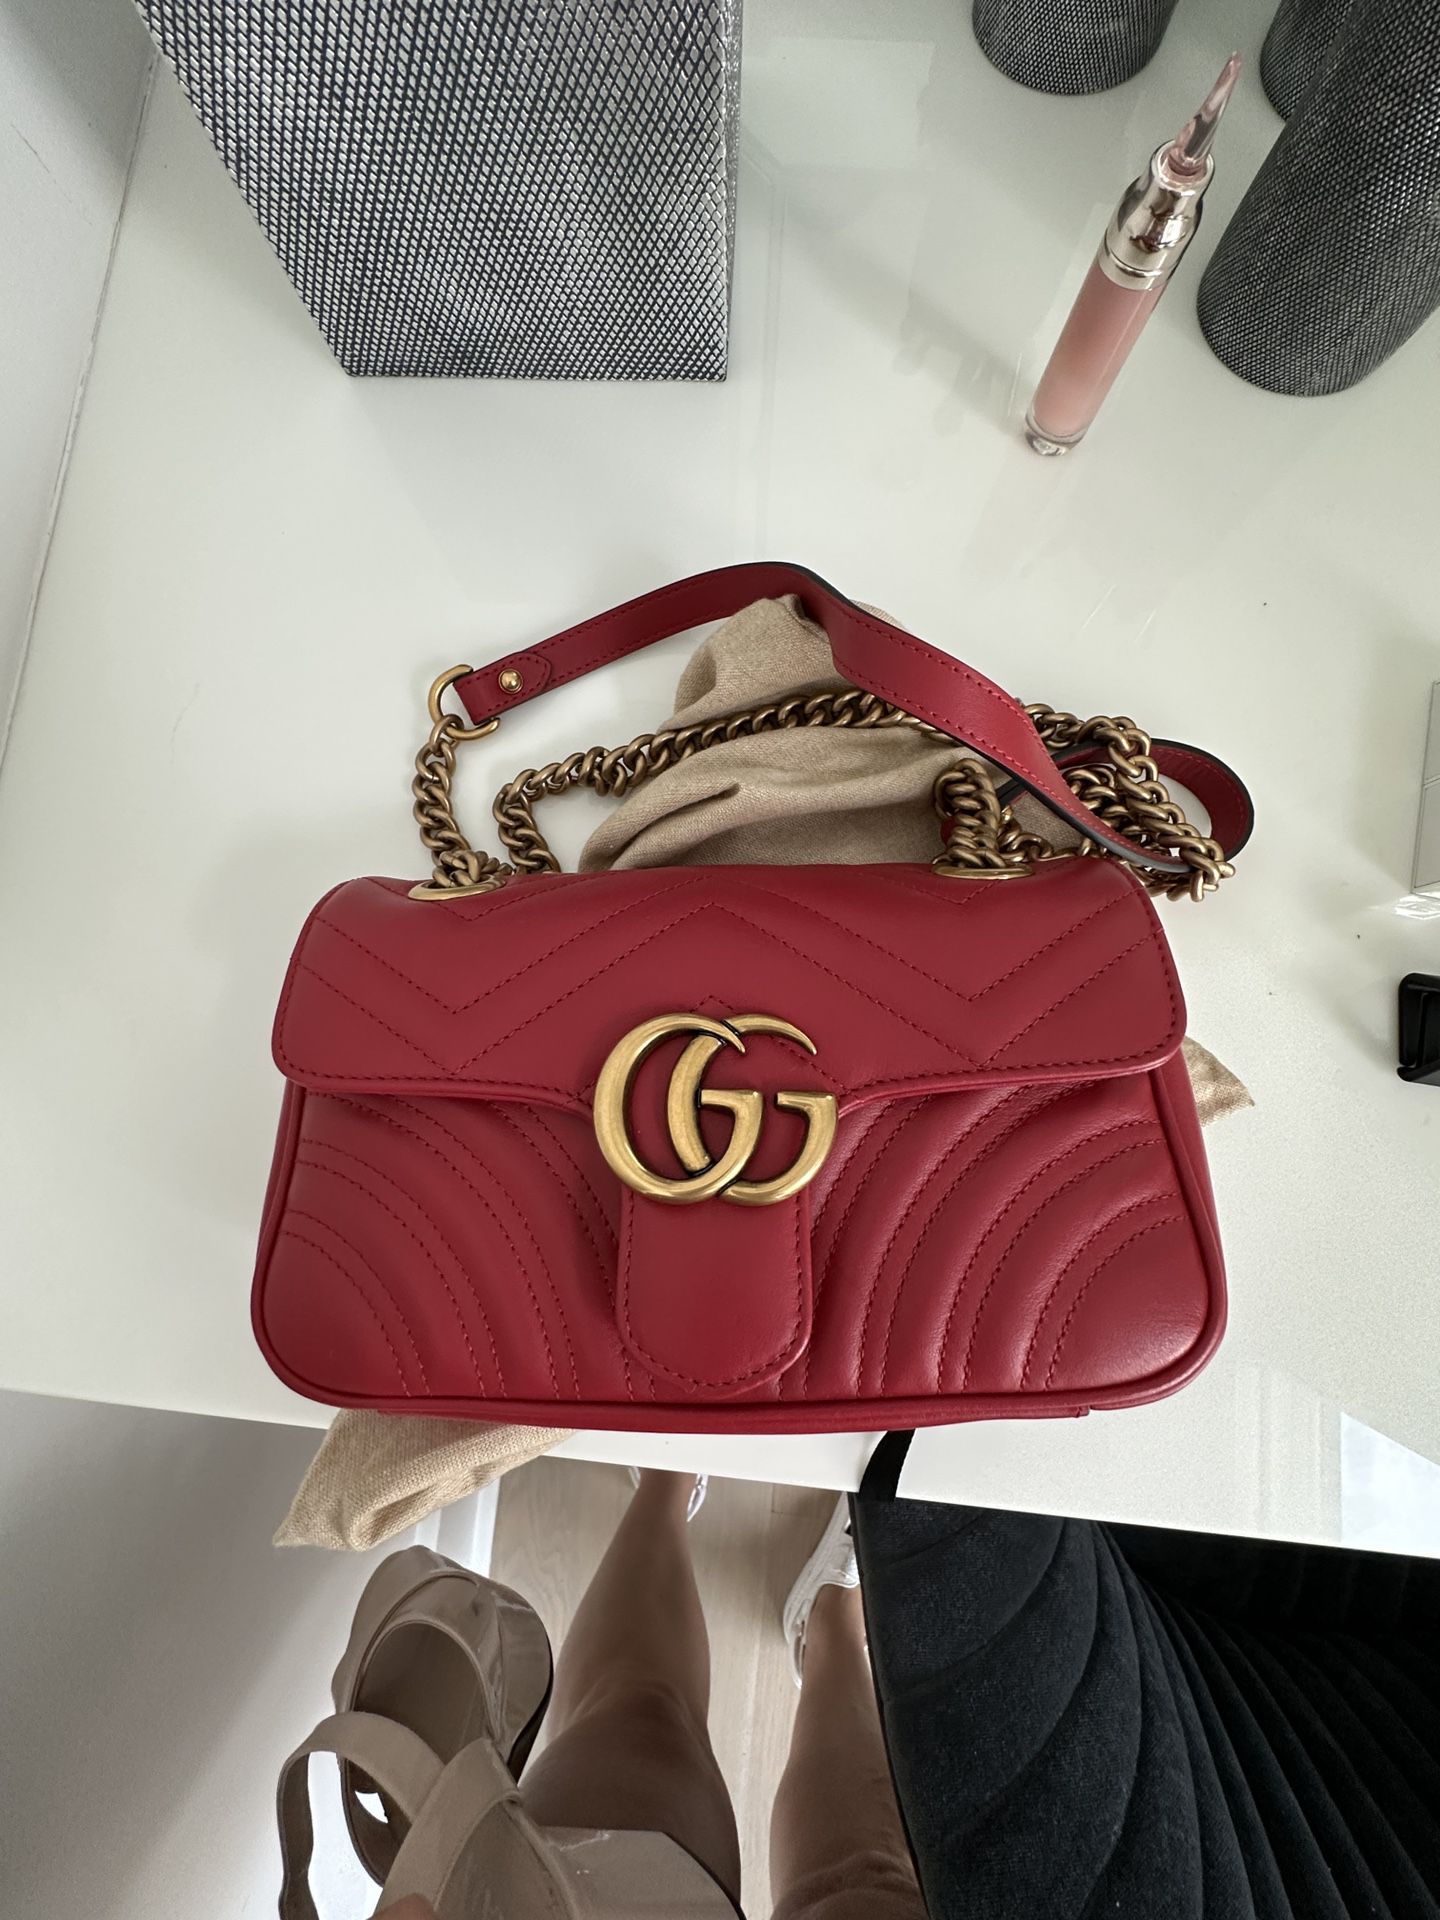 GUCCI GG MARMONT SMALL SHOULDER BAG RED LEATHER